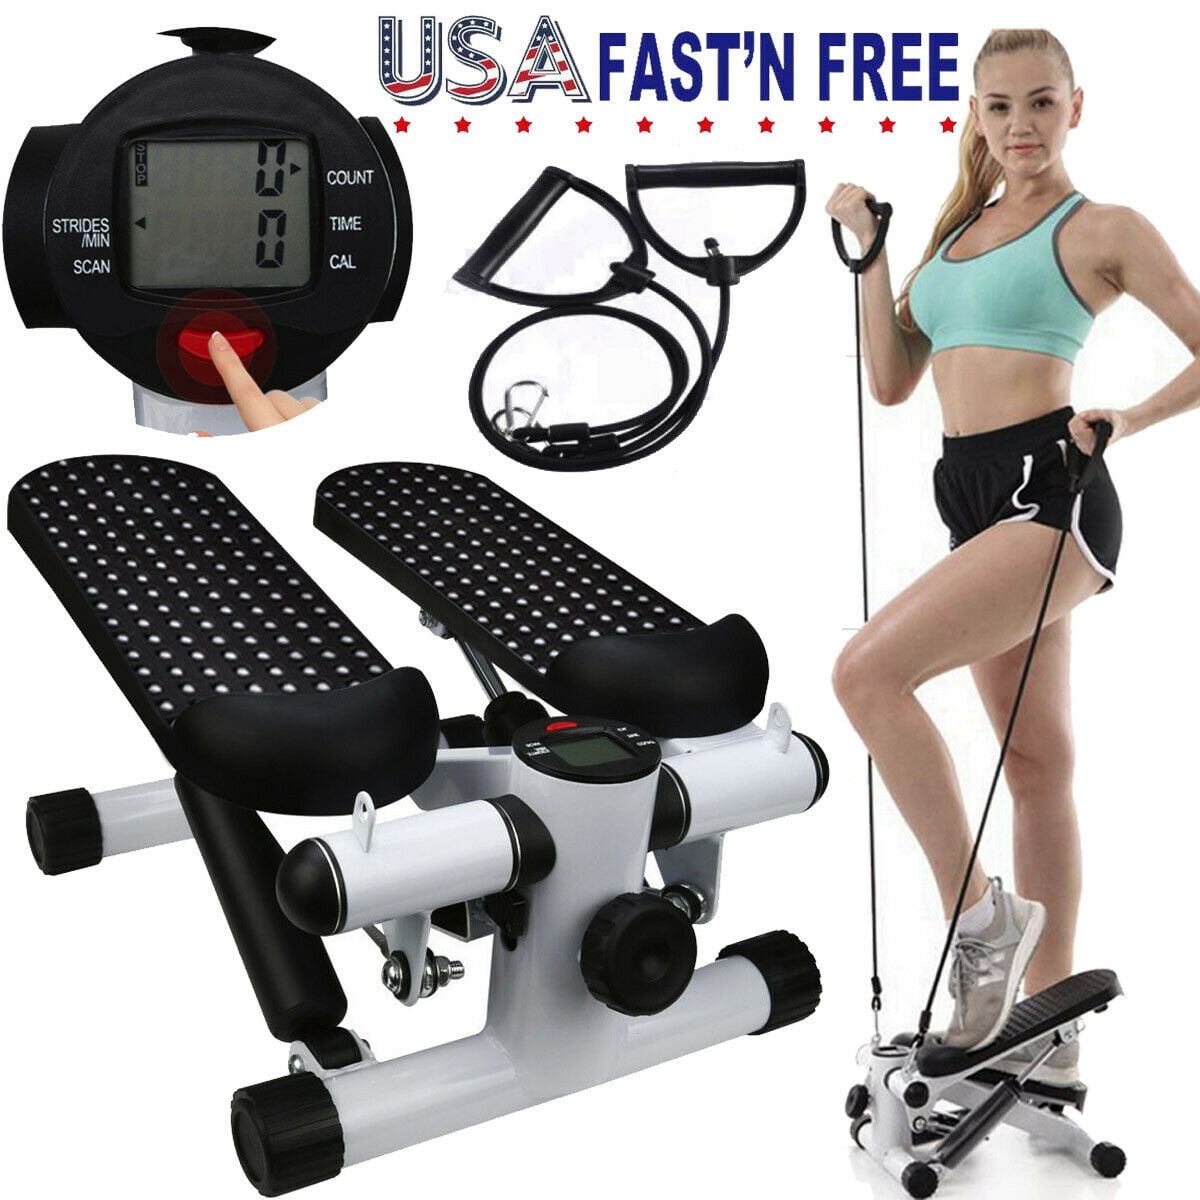 Fitness Step Hydraulic Stair Climber Stepper Exercise Machine Cardio Equipment 